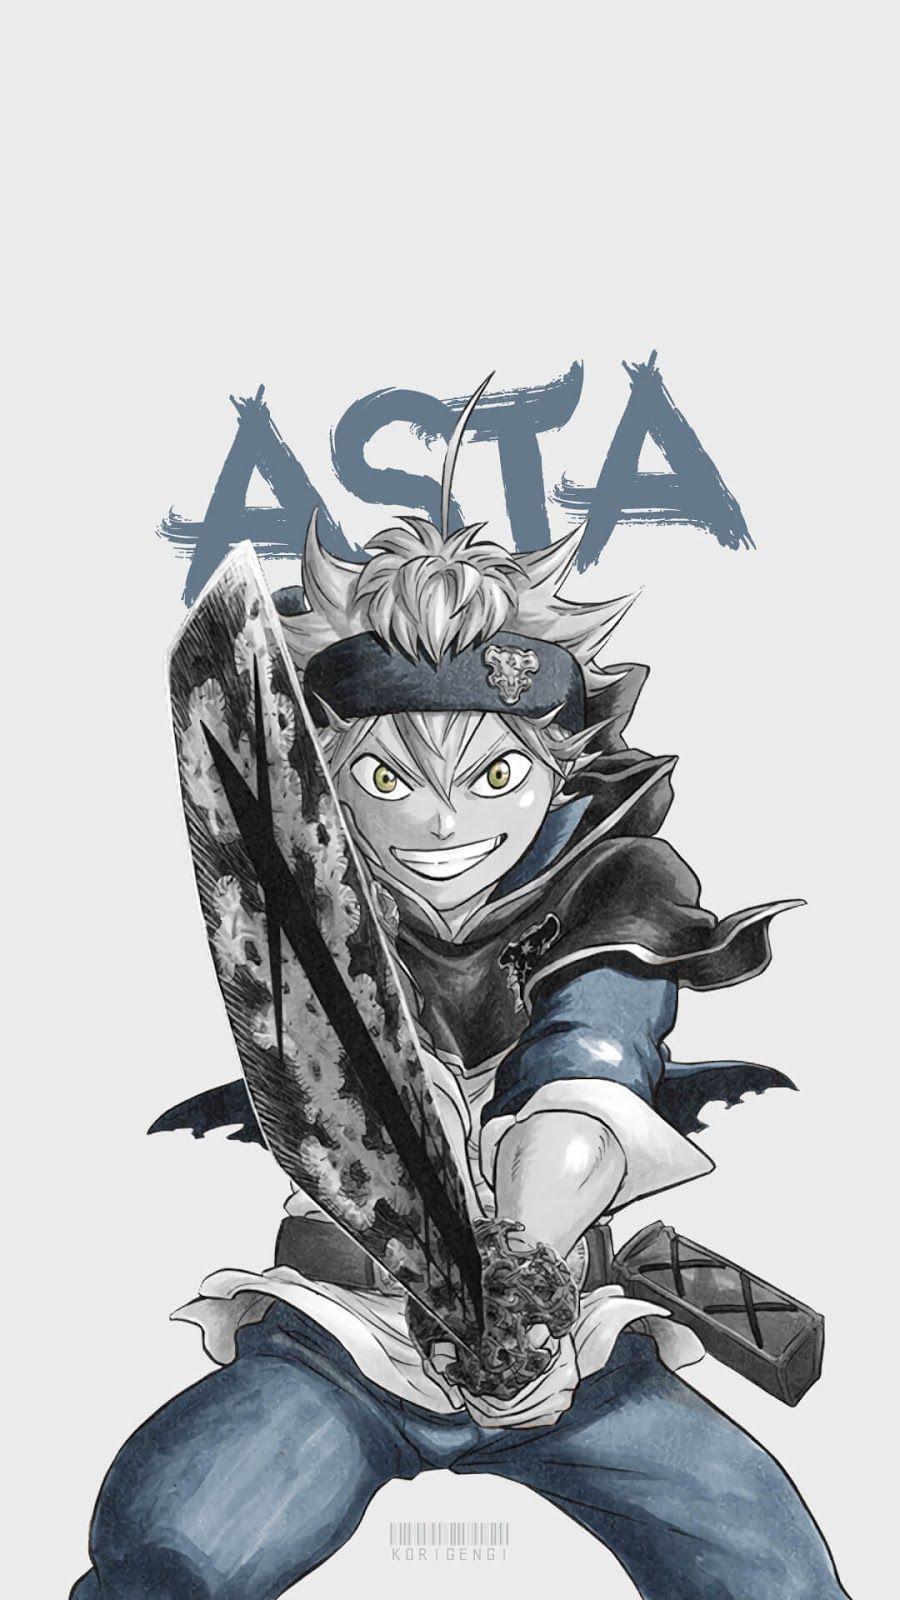 Black Clover Iphone Wallpapers Top Free Black Clover Iphone